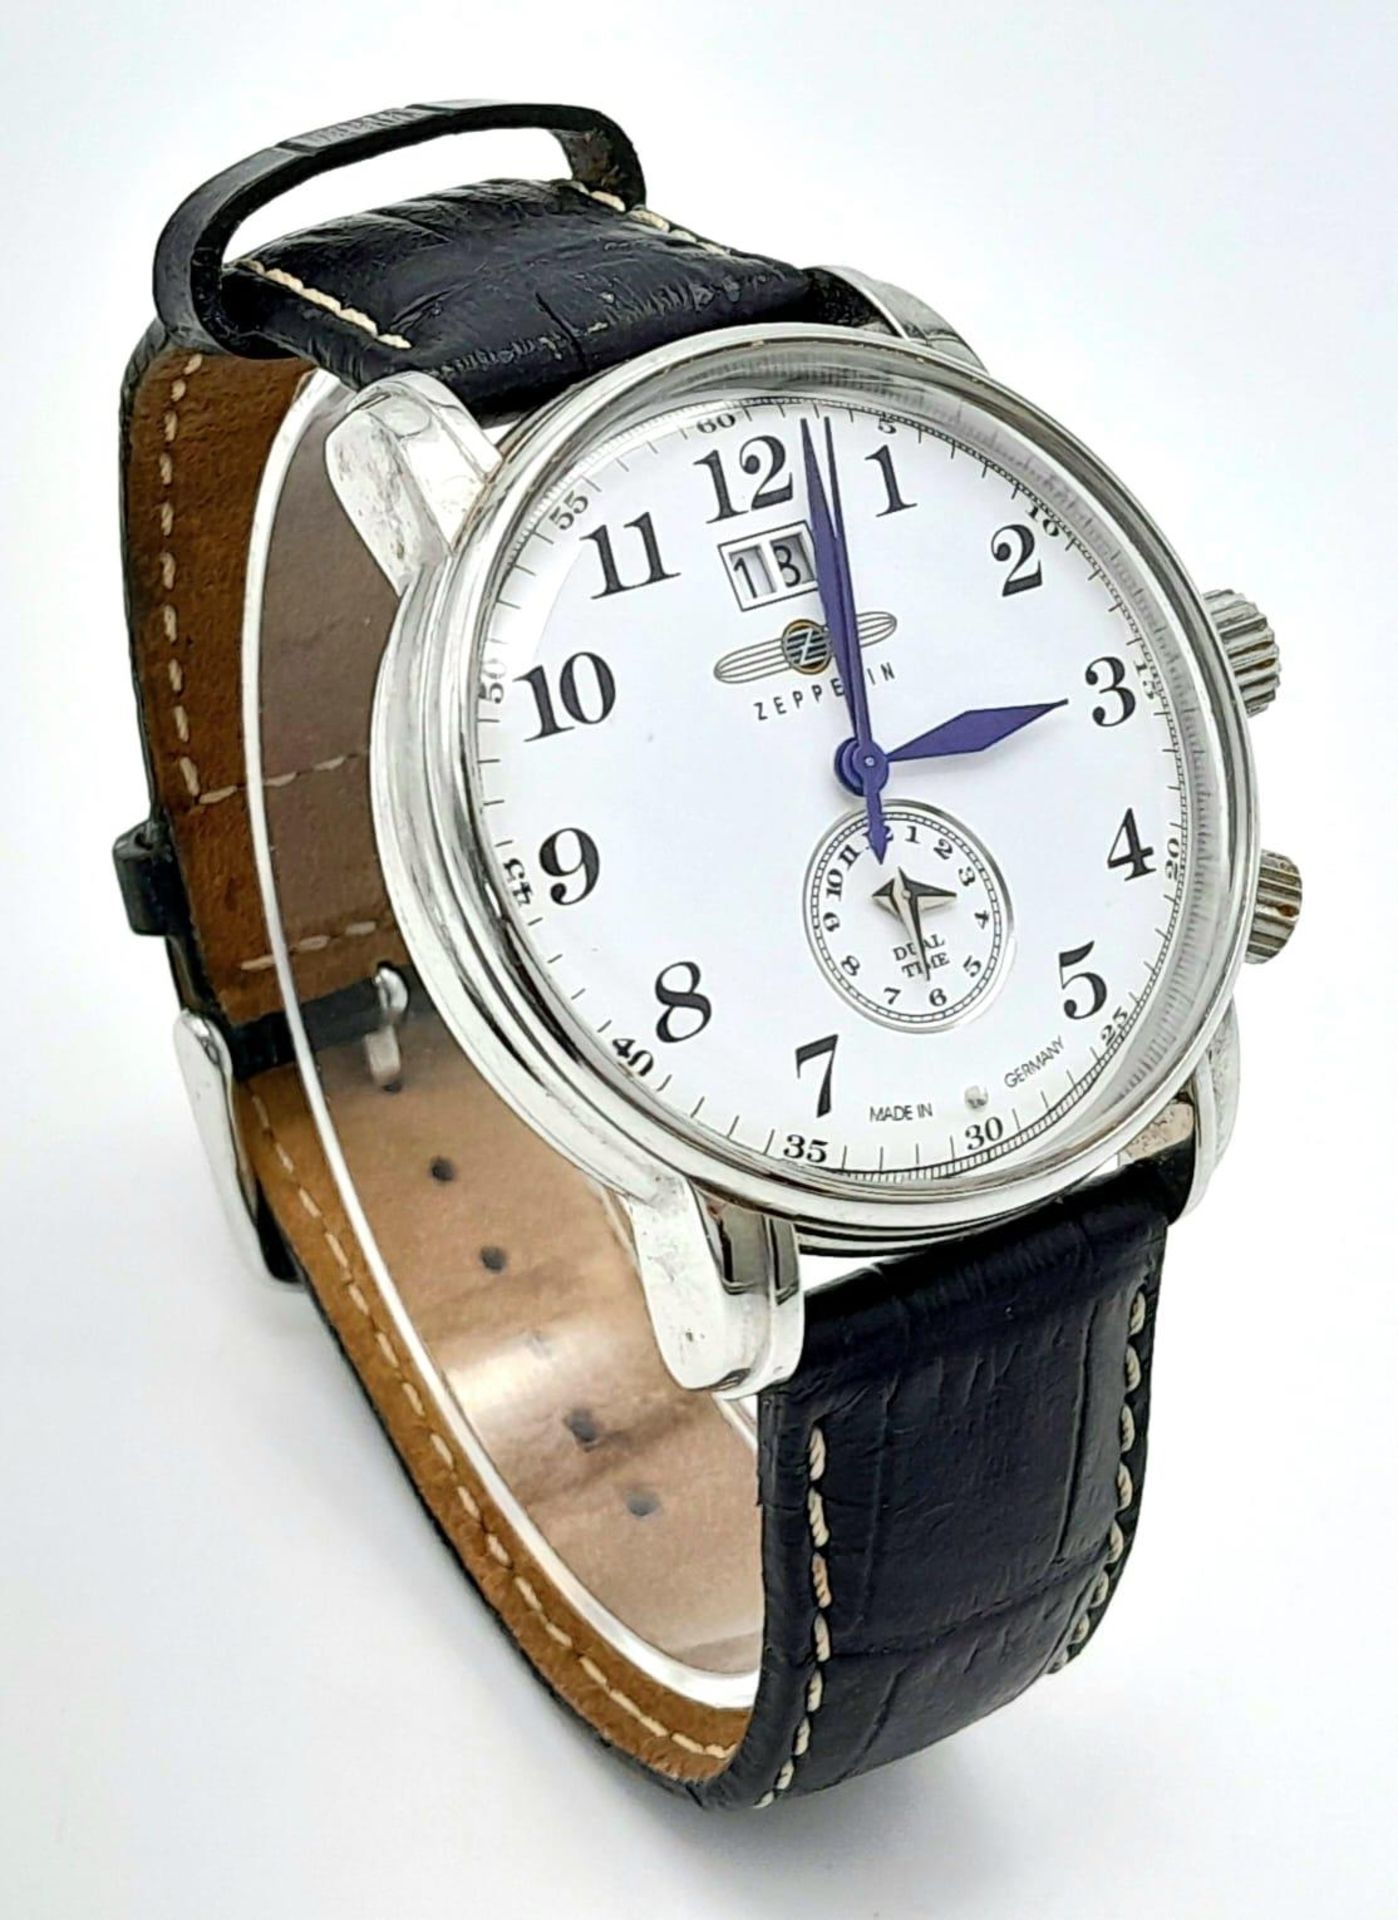 A German Made Zeppelin Dual Time Gents Quartz Watch. Black leather strap. Stainless steel case - - Image 3 of 7